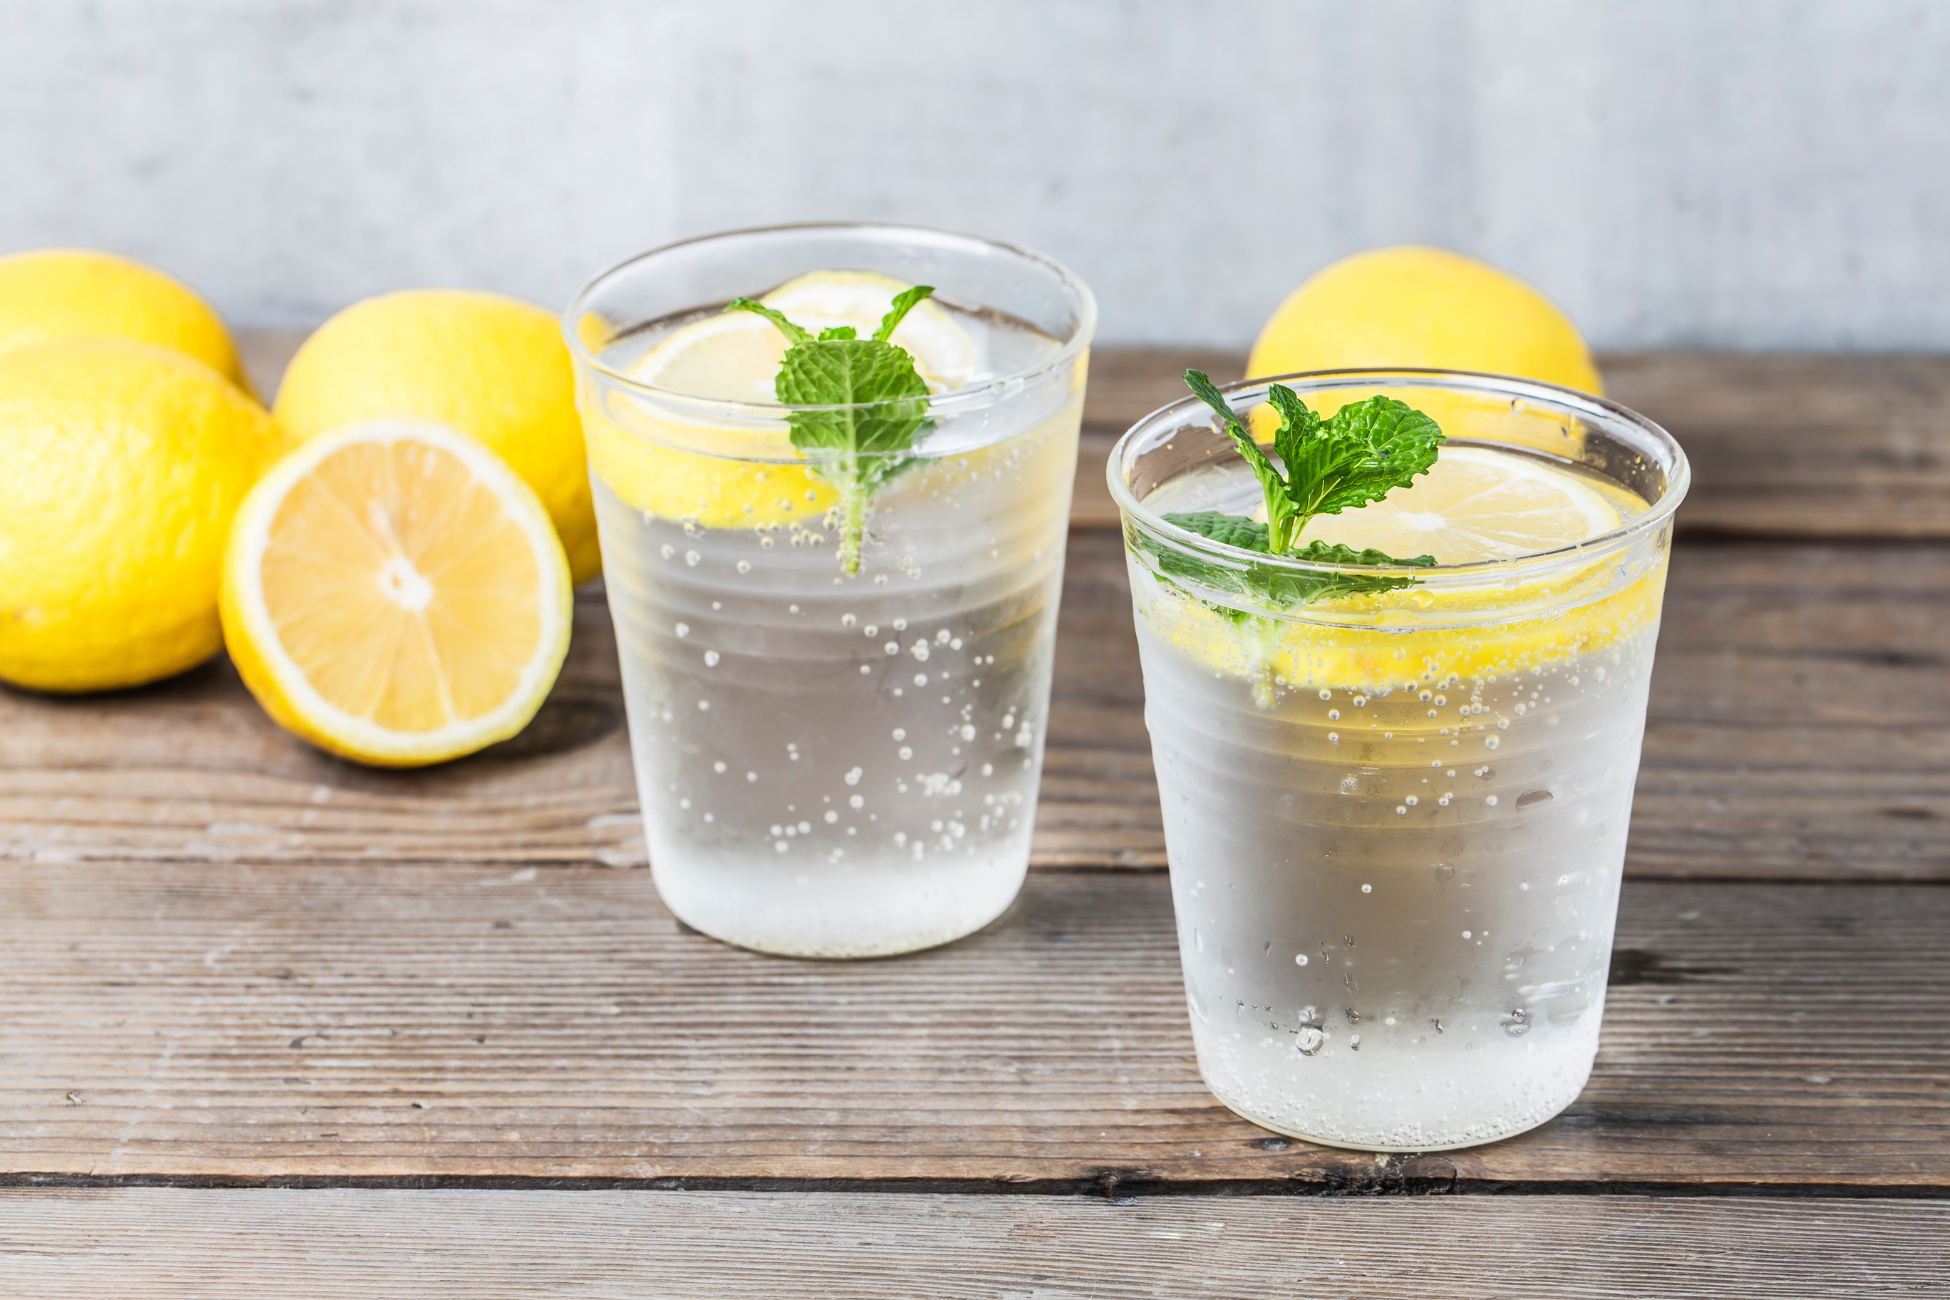 Homemade Lemonade Recipe to Quench Your Thirst